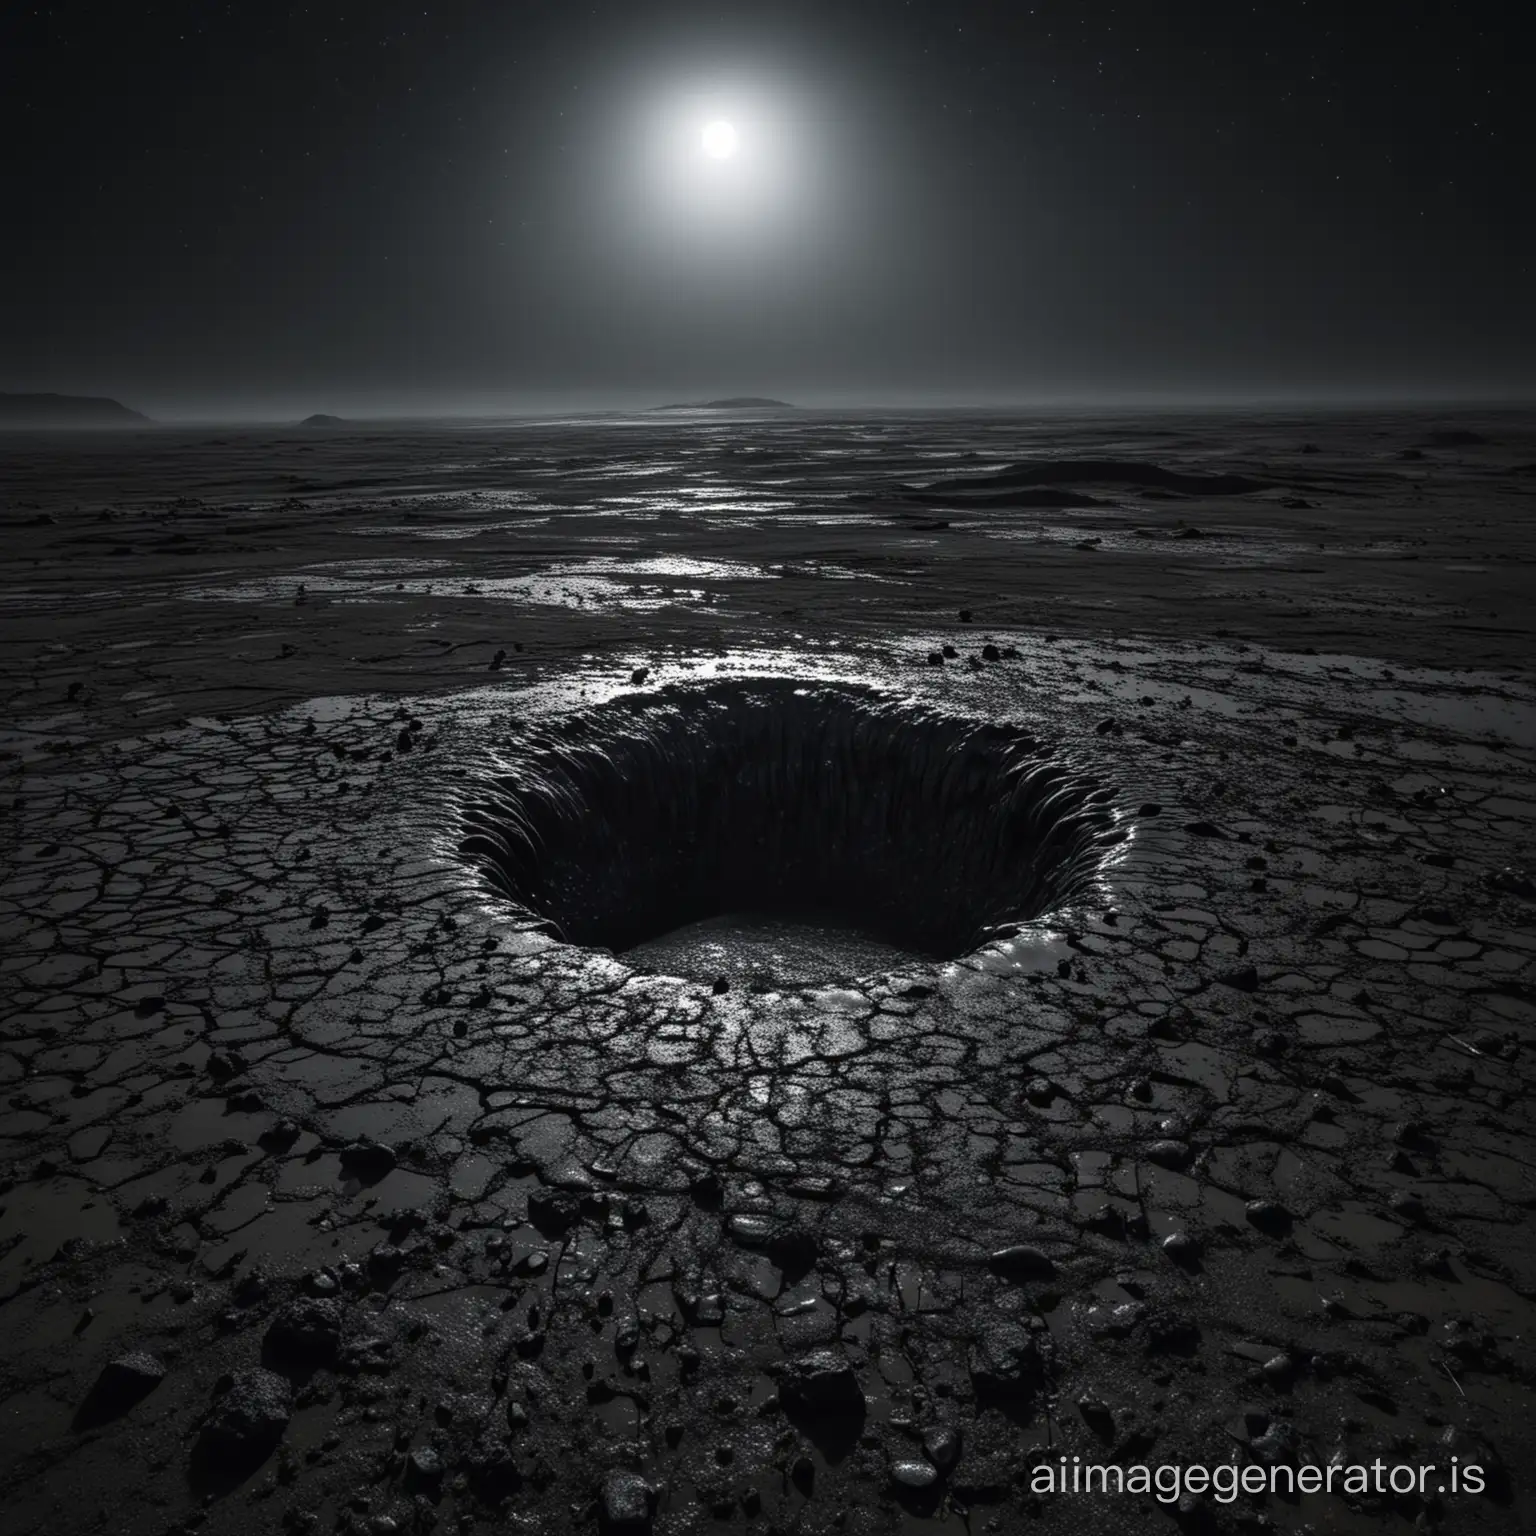 Moonlit-Night-Sailors-Encounter-with-Whale-Remains-in-a-Mysterious-Crater